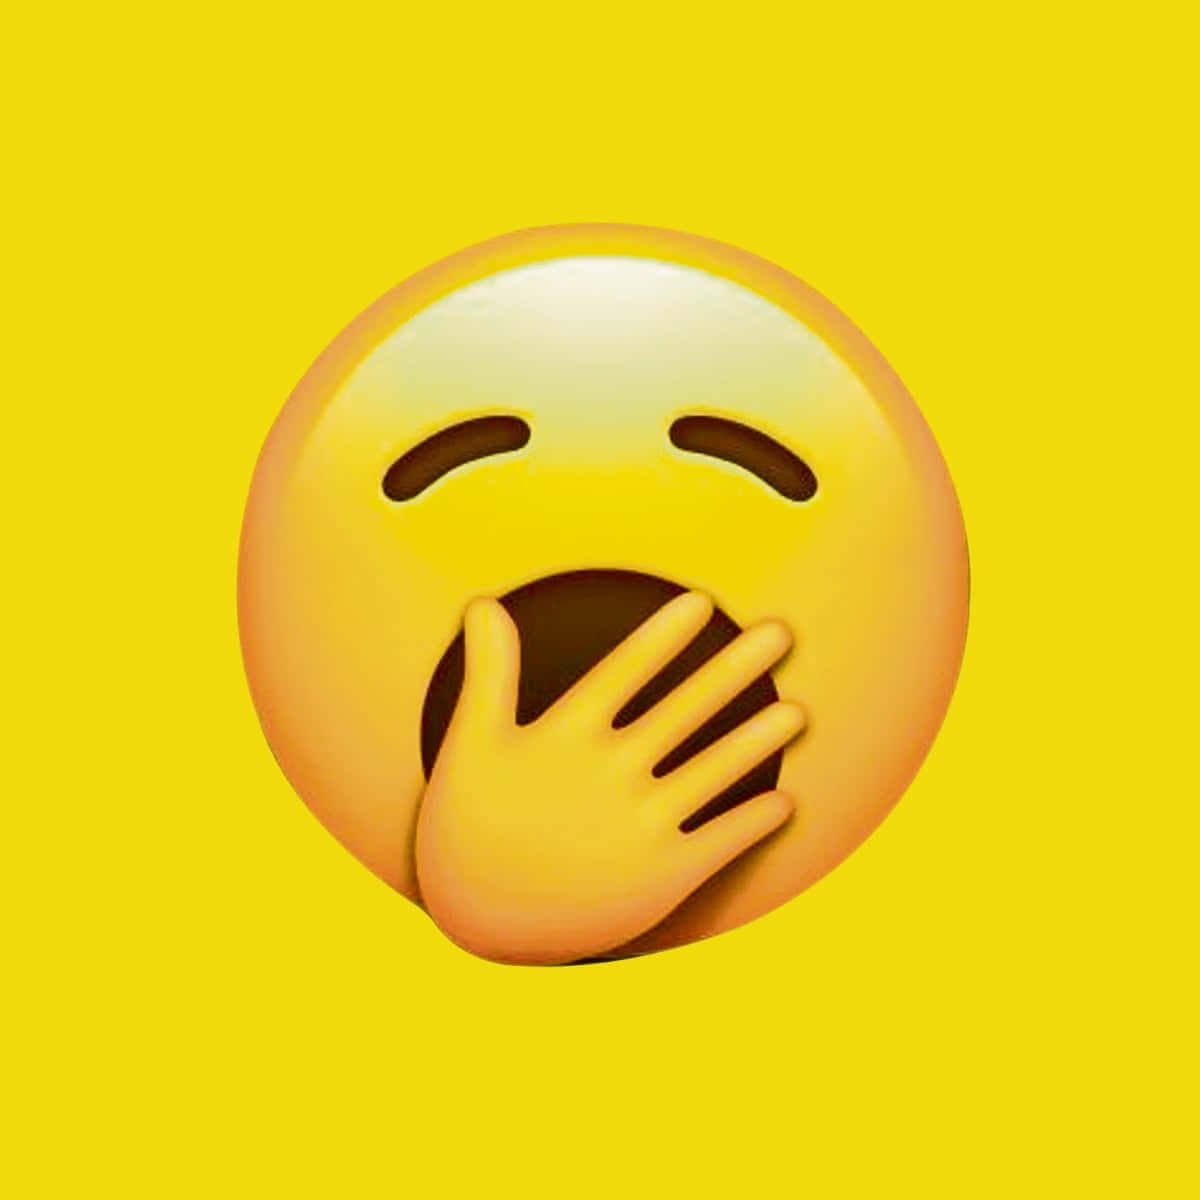 Download Yawning Emoji On Yellow Picture | Wallpapers.com